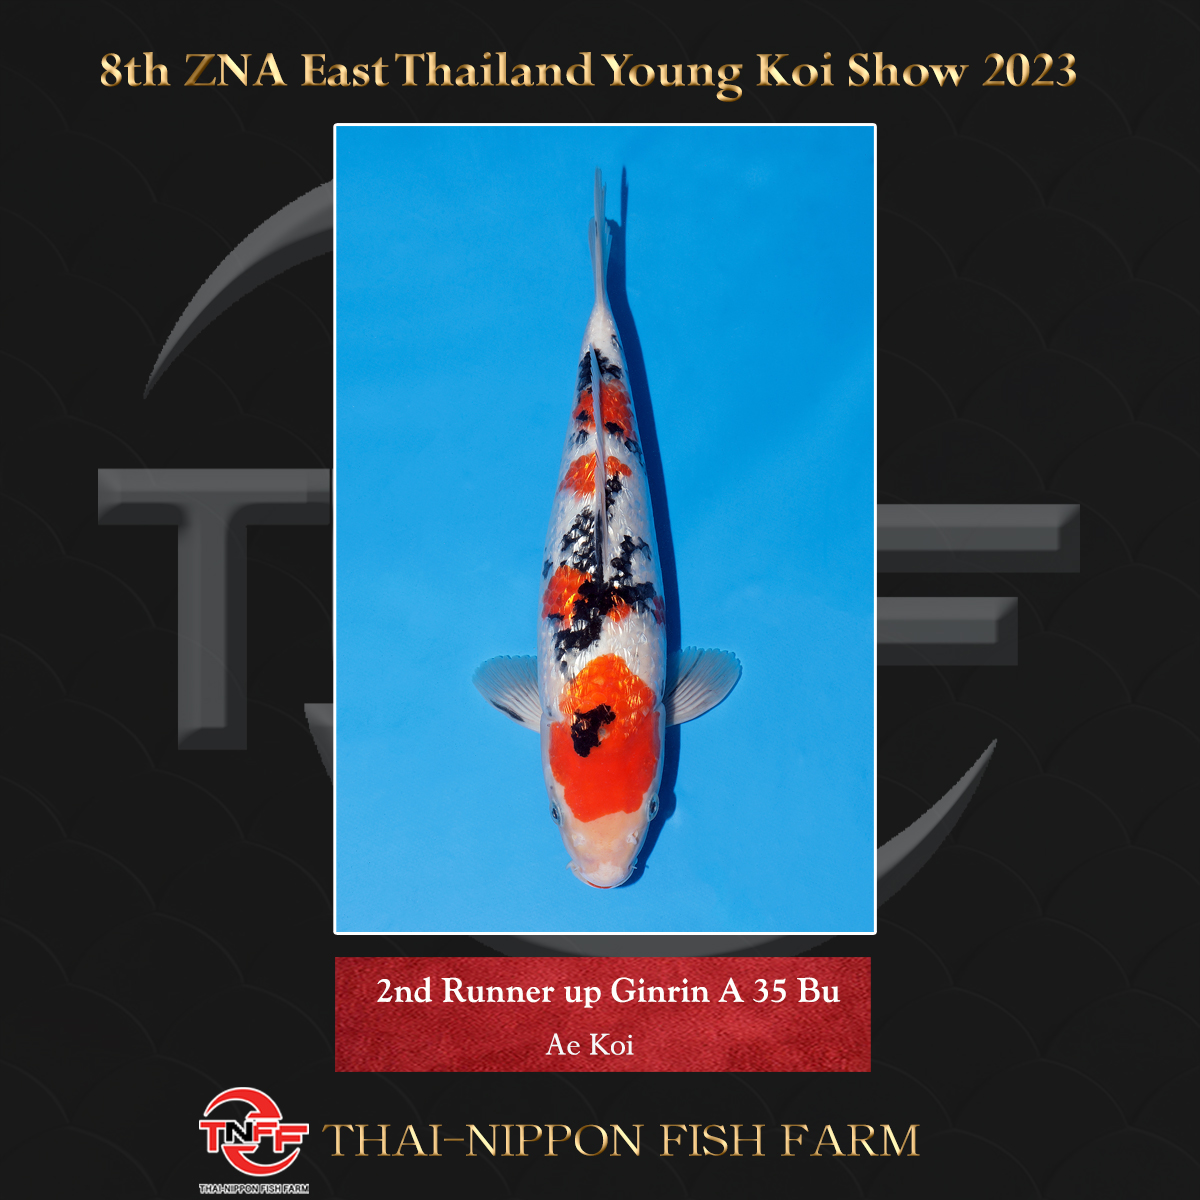 8th ZNA East Thailand Young Koi Show 2023